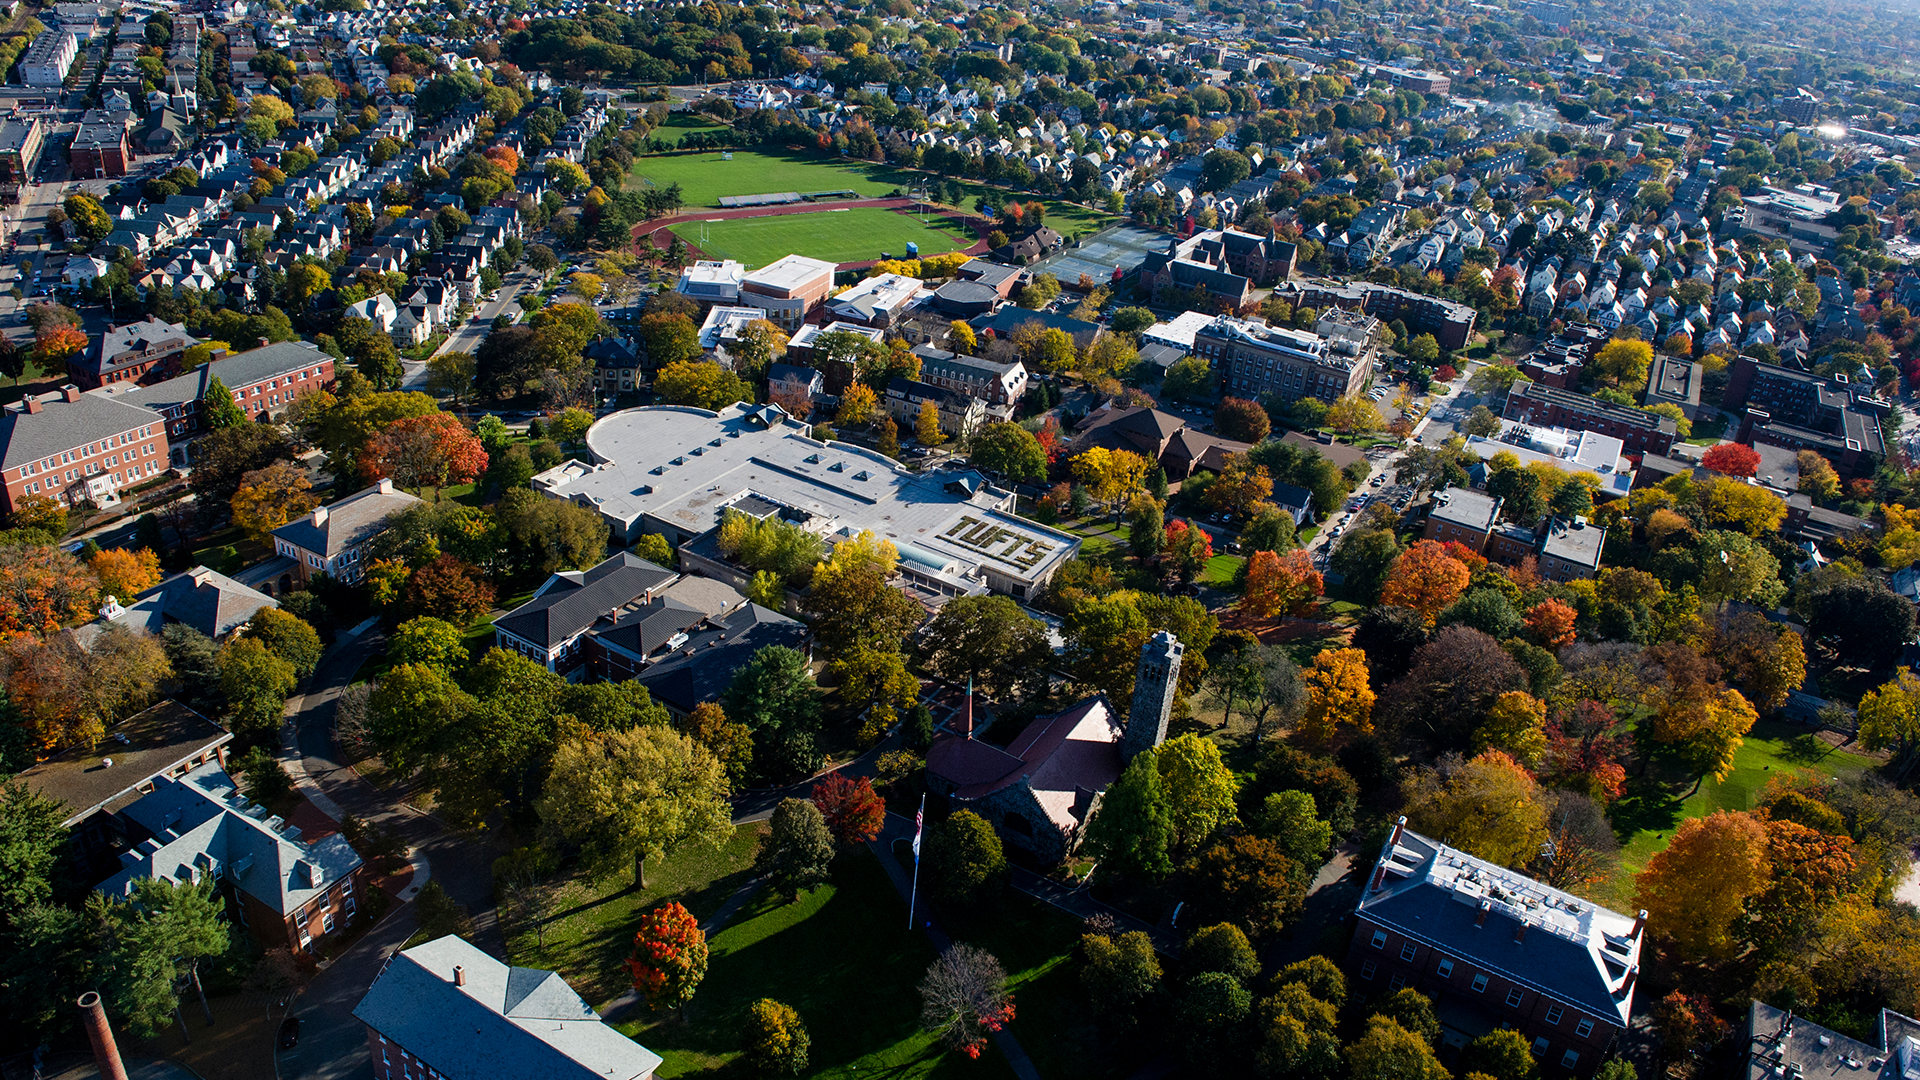 Ariel view of Tufts campus